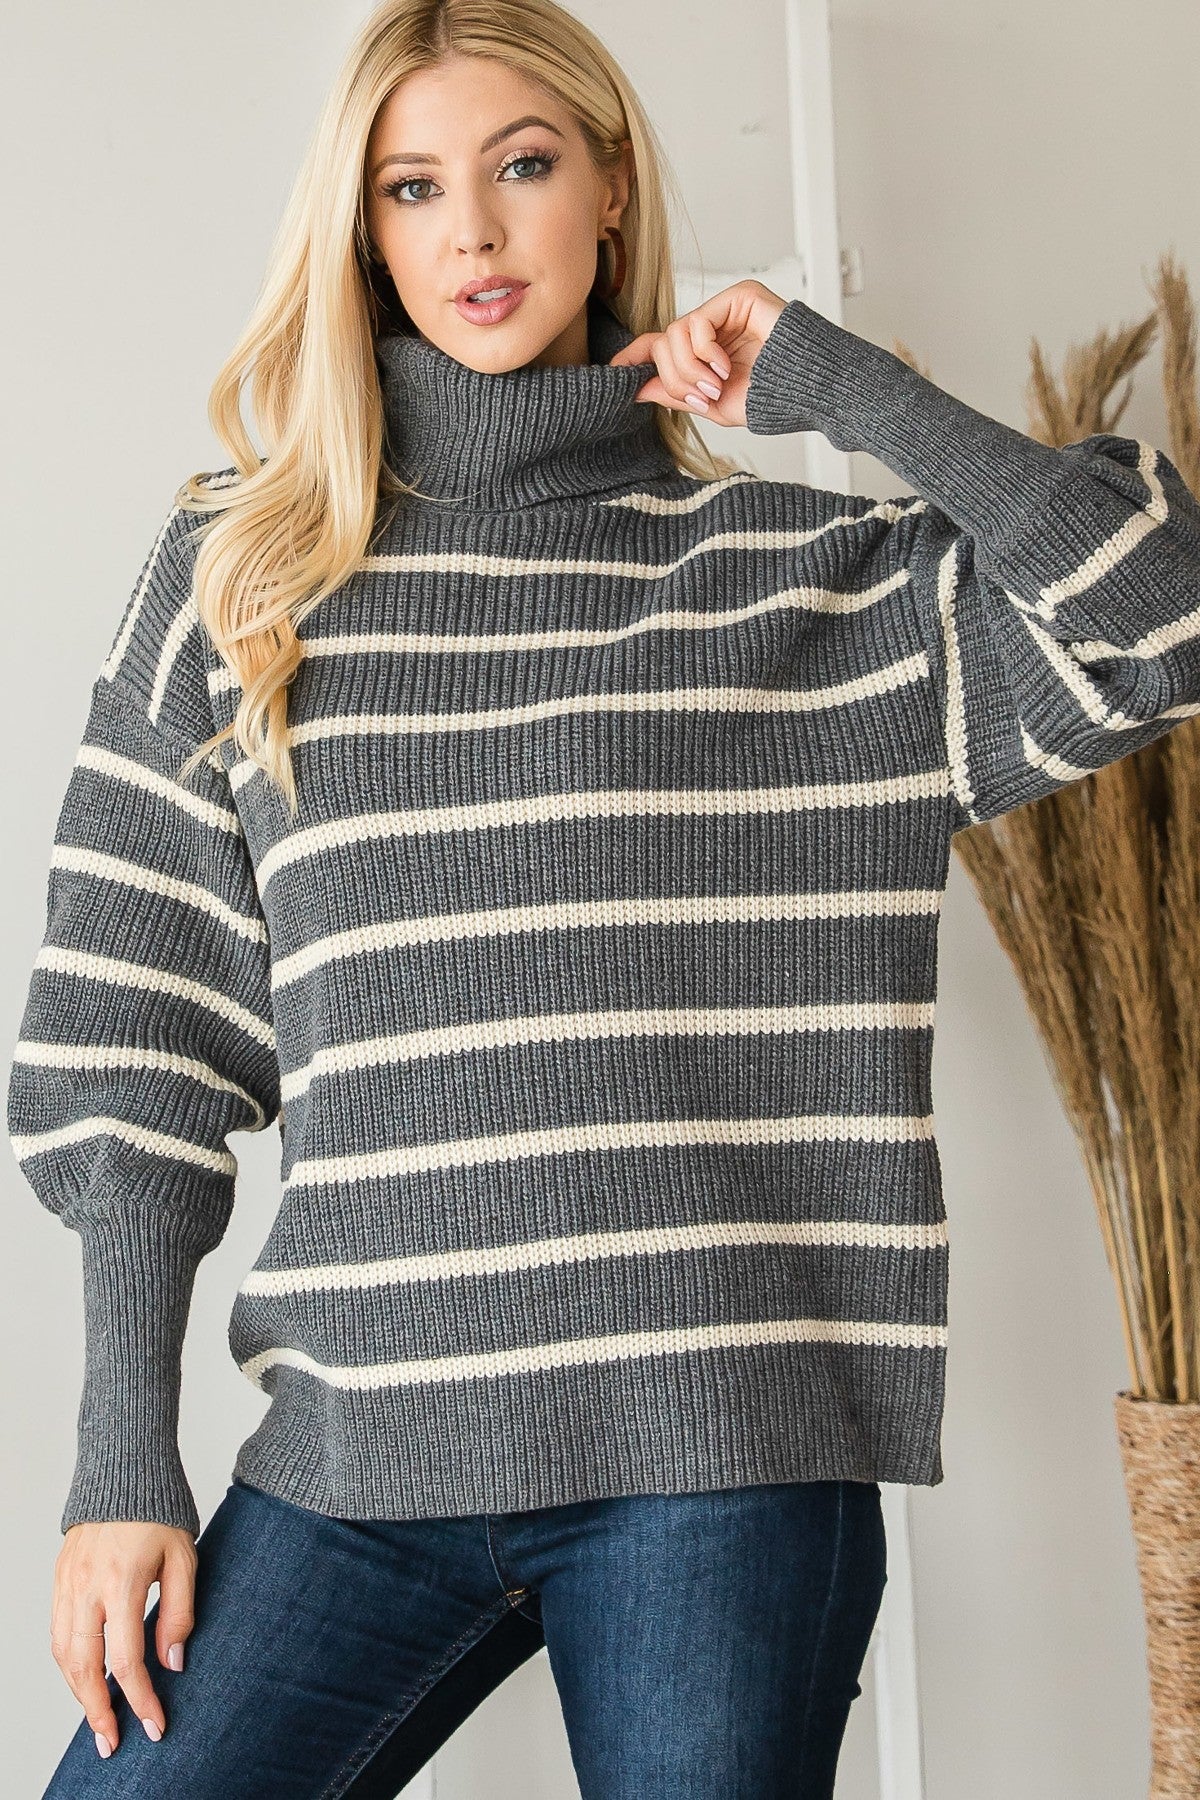 THE HEATHER Heavy Knit Striped Turtle Neck Knit Sweater